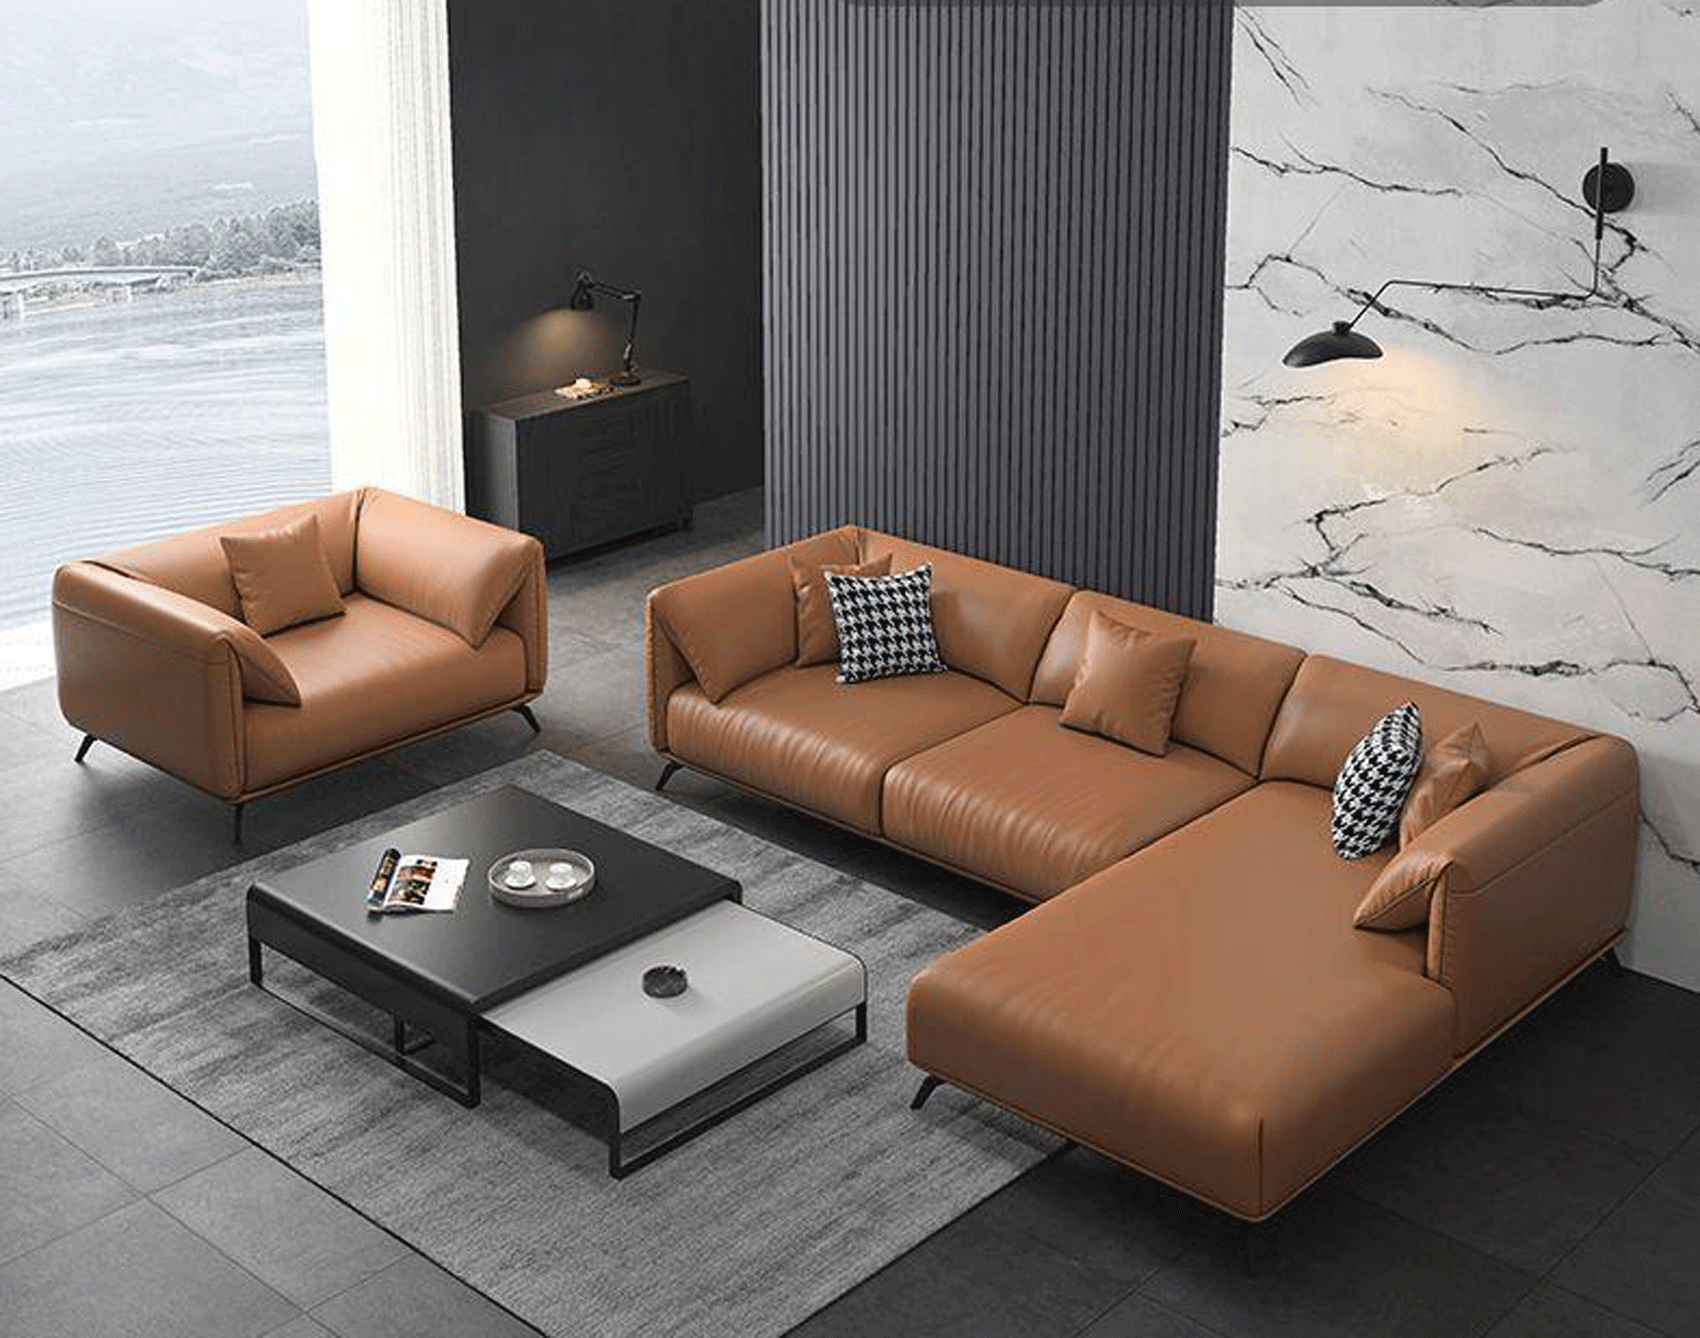 Living Room Furniture Sleepers Sofas Loveseats and Chairs 8012 Living Room Set